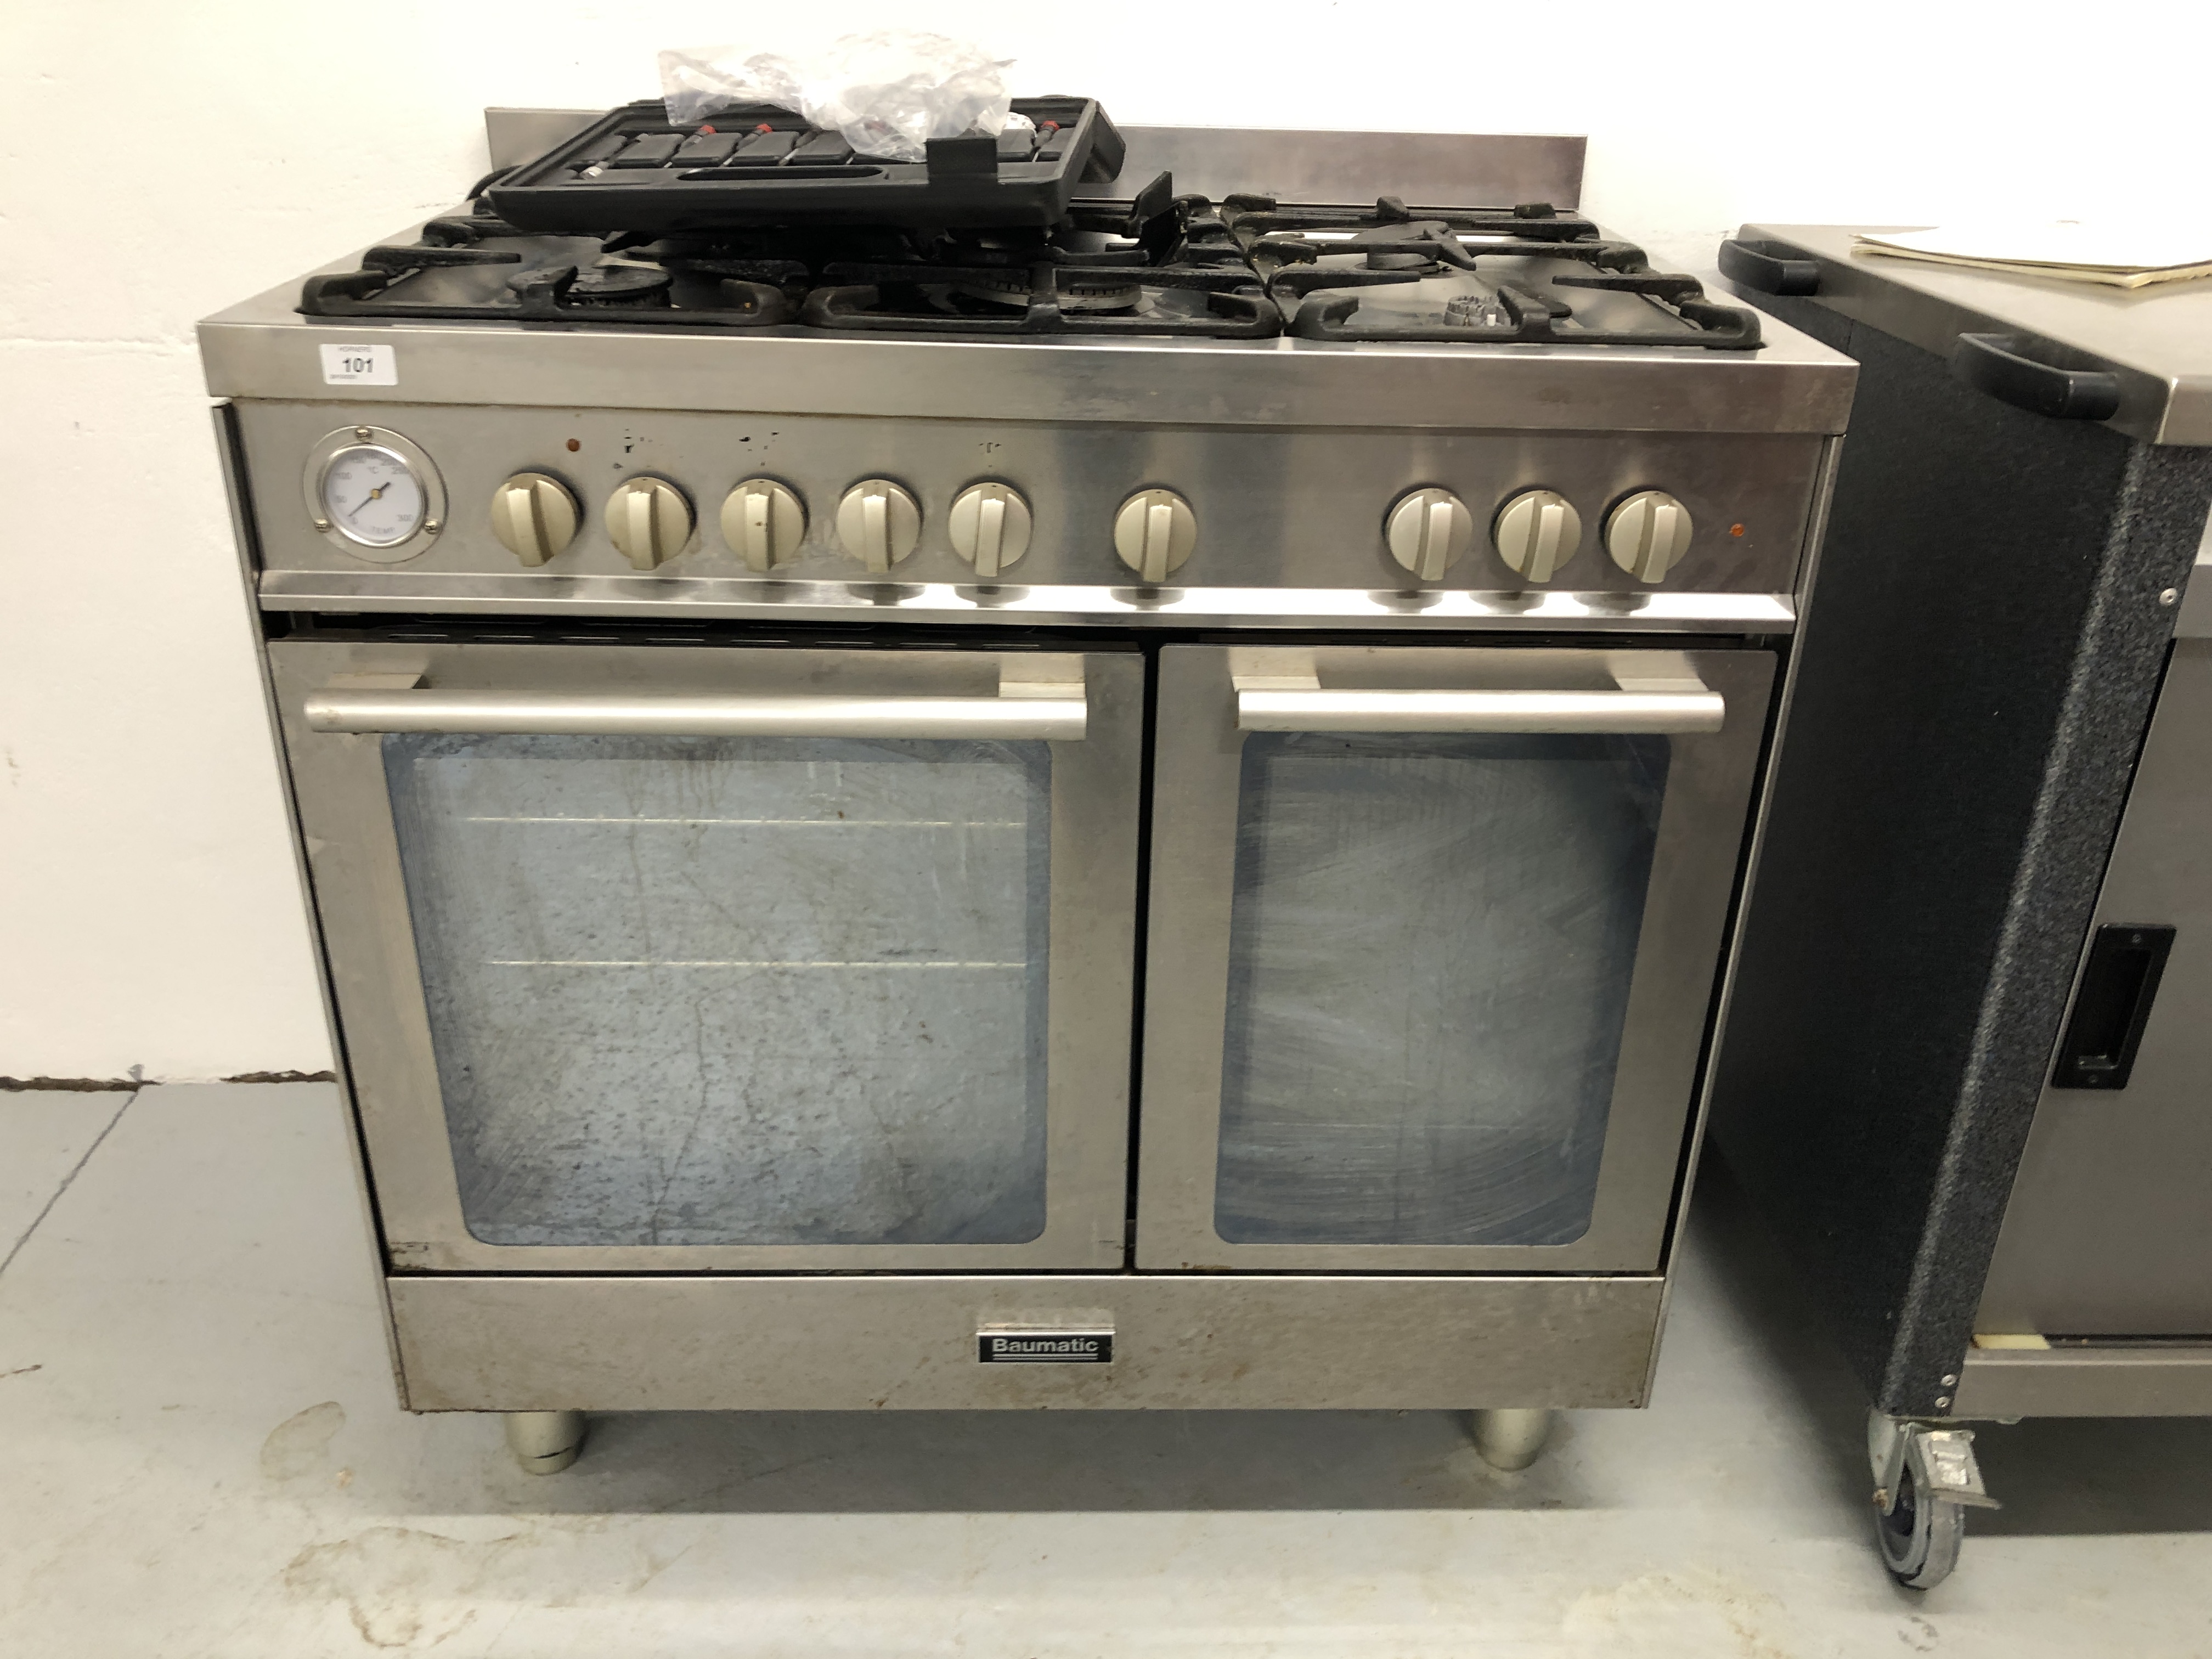 A BAUMATIC STAINLESS STEEL MAINS GAS DOMESTIC COOKING RANGE (REAR LEG BROKEN) - TRADE ONLY - SOLD